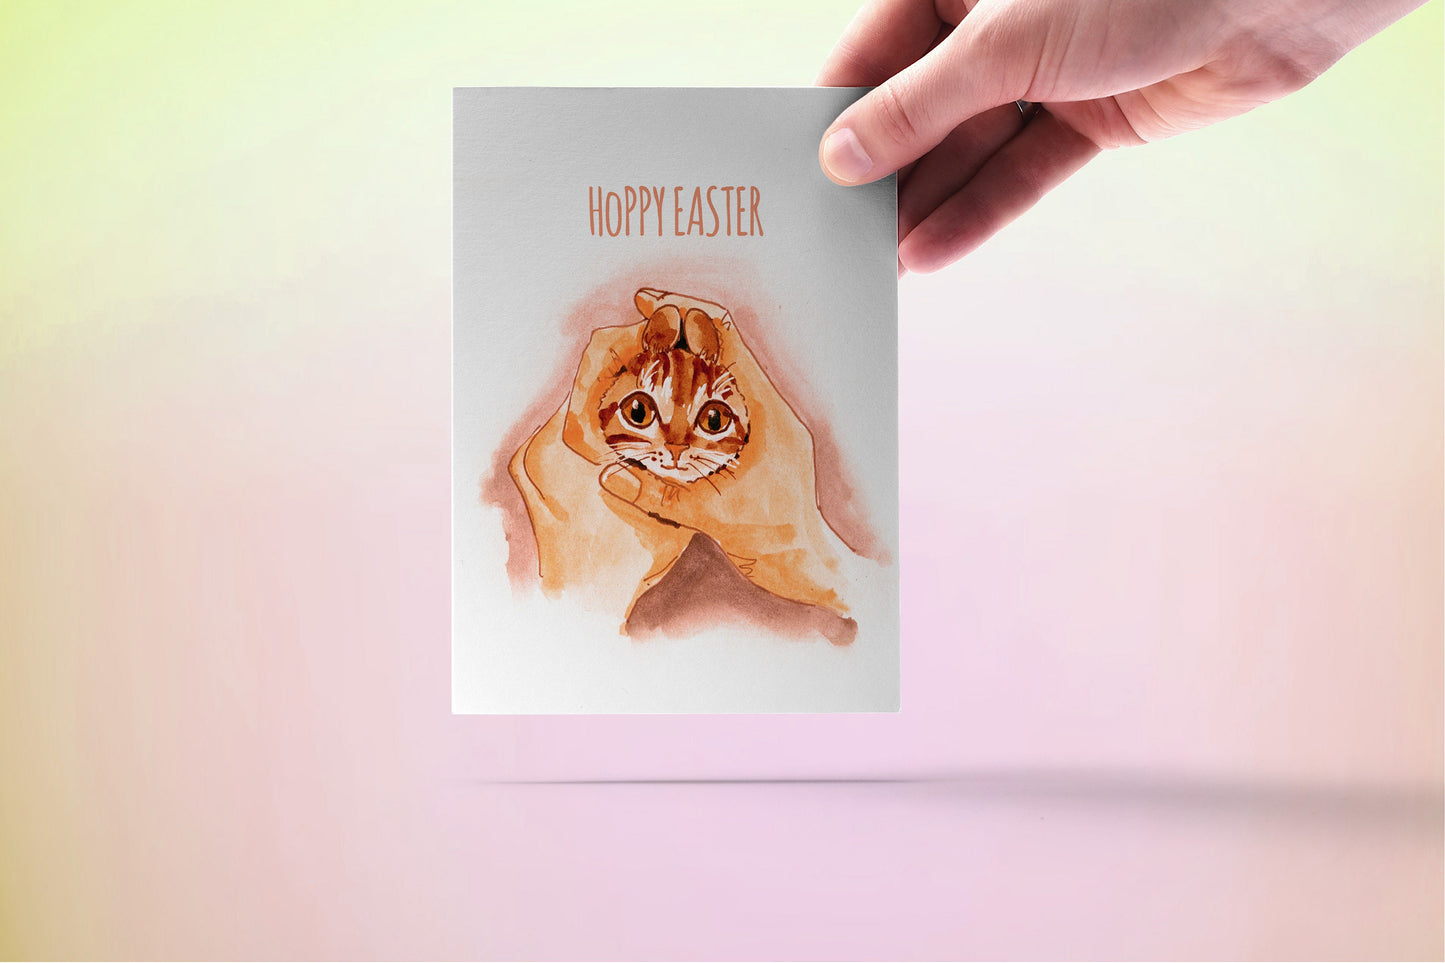 Funny Bunny Ears Cat Easter Cards - Hoppy Easter Cards Pack For Cats Lover - Watercolor Spring Greeting Card Set For friends